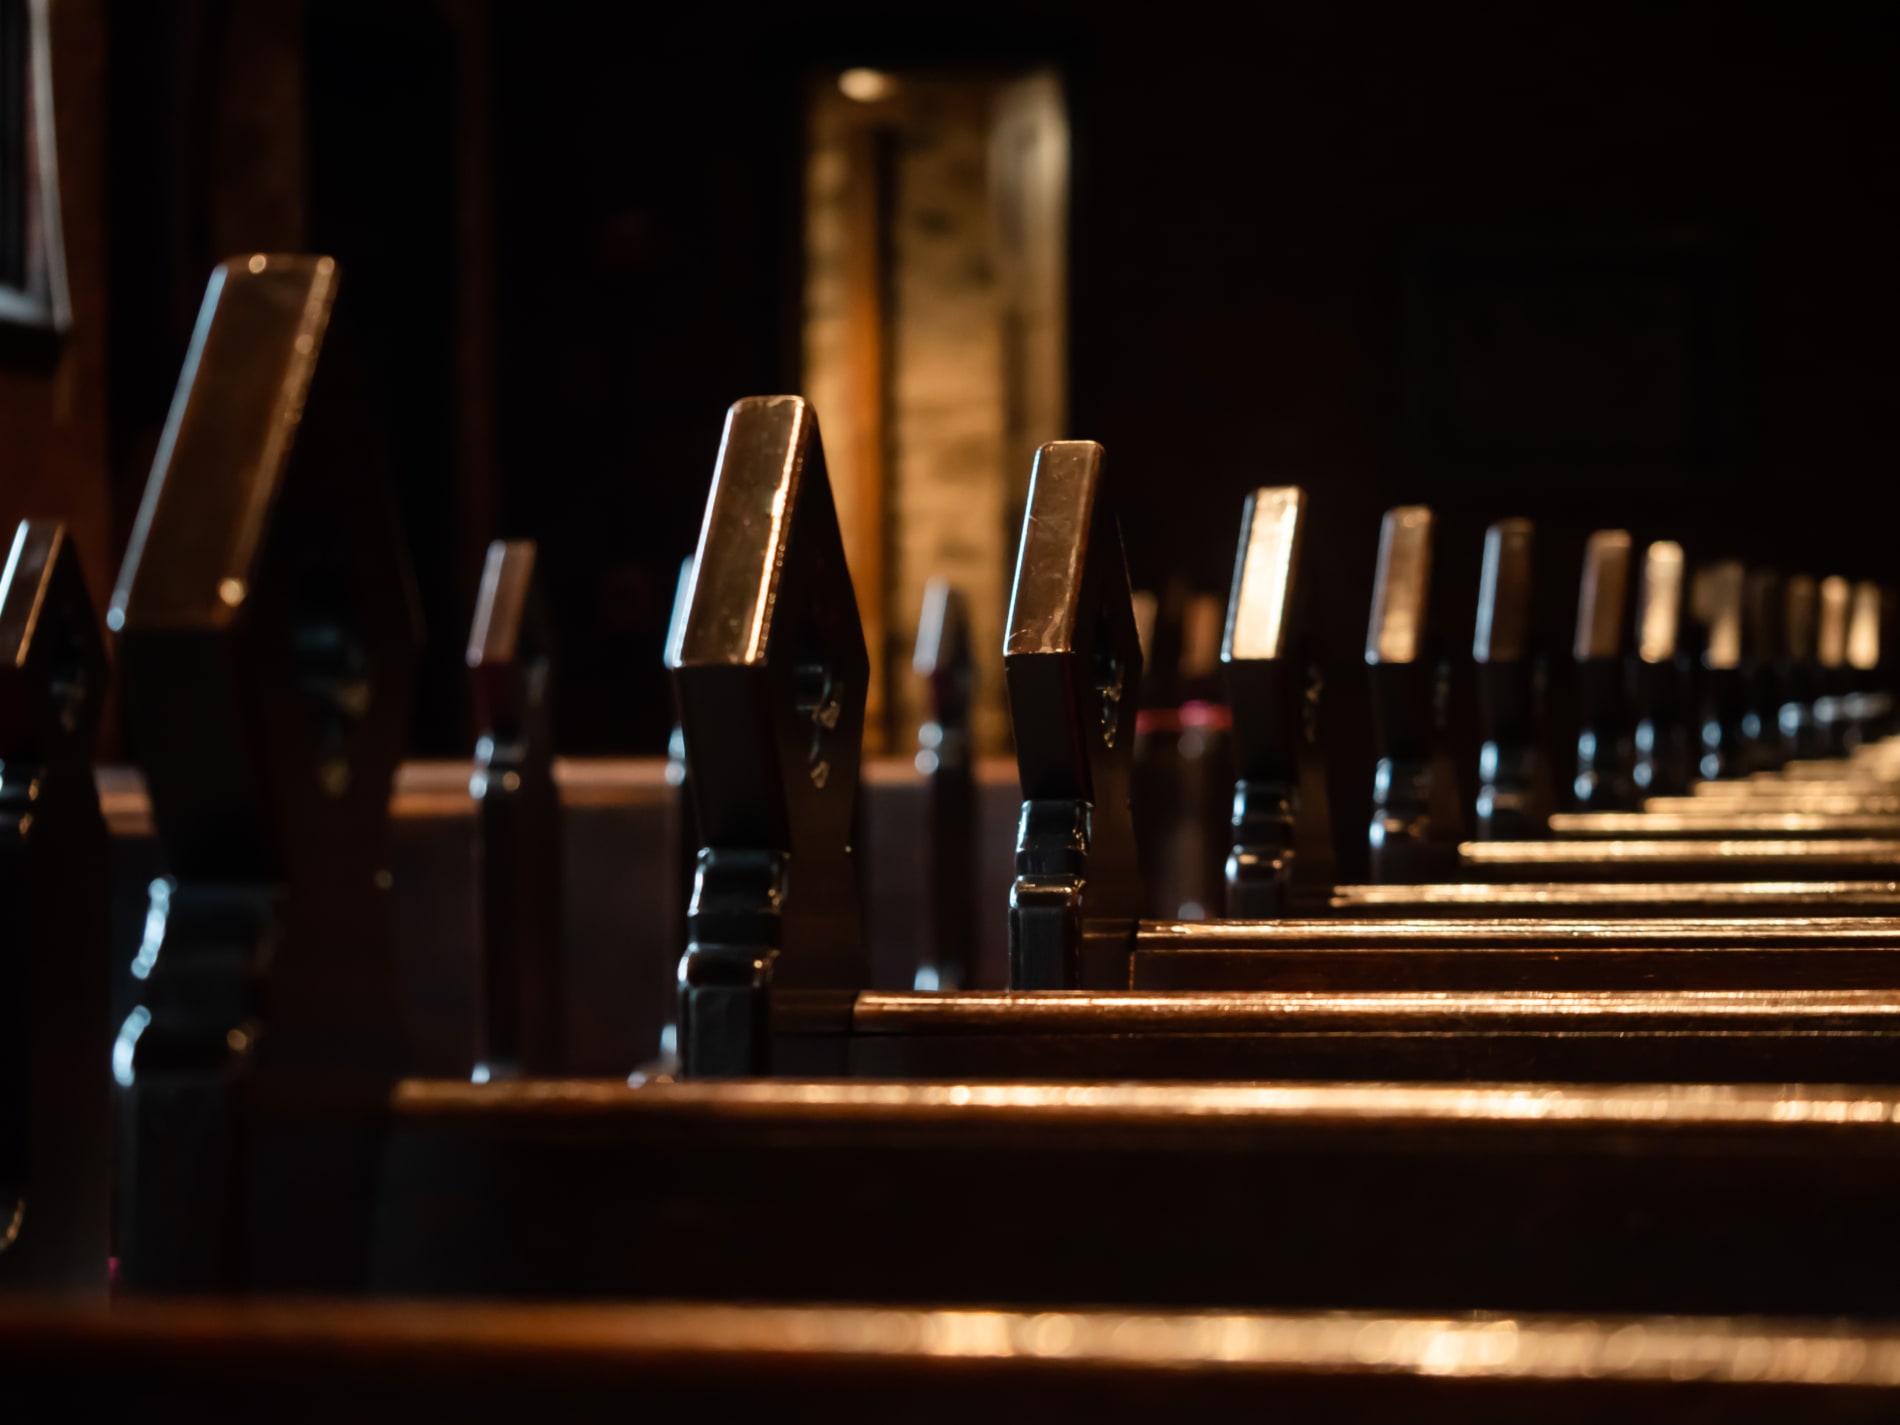 Wooden carved finials on church pews